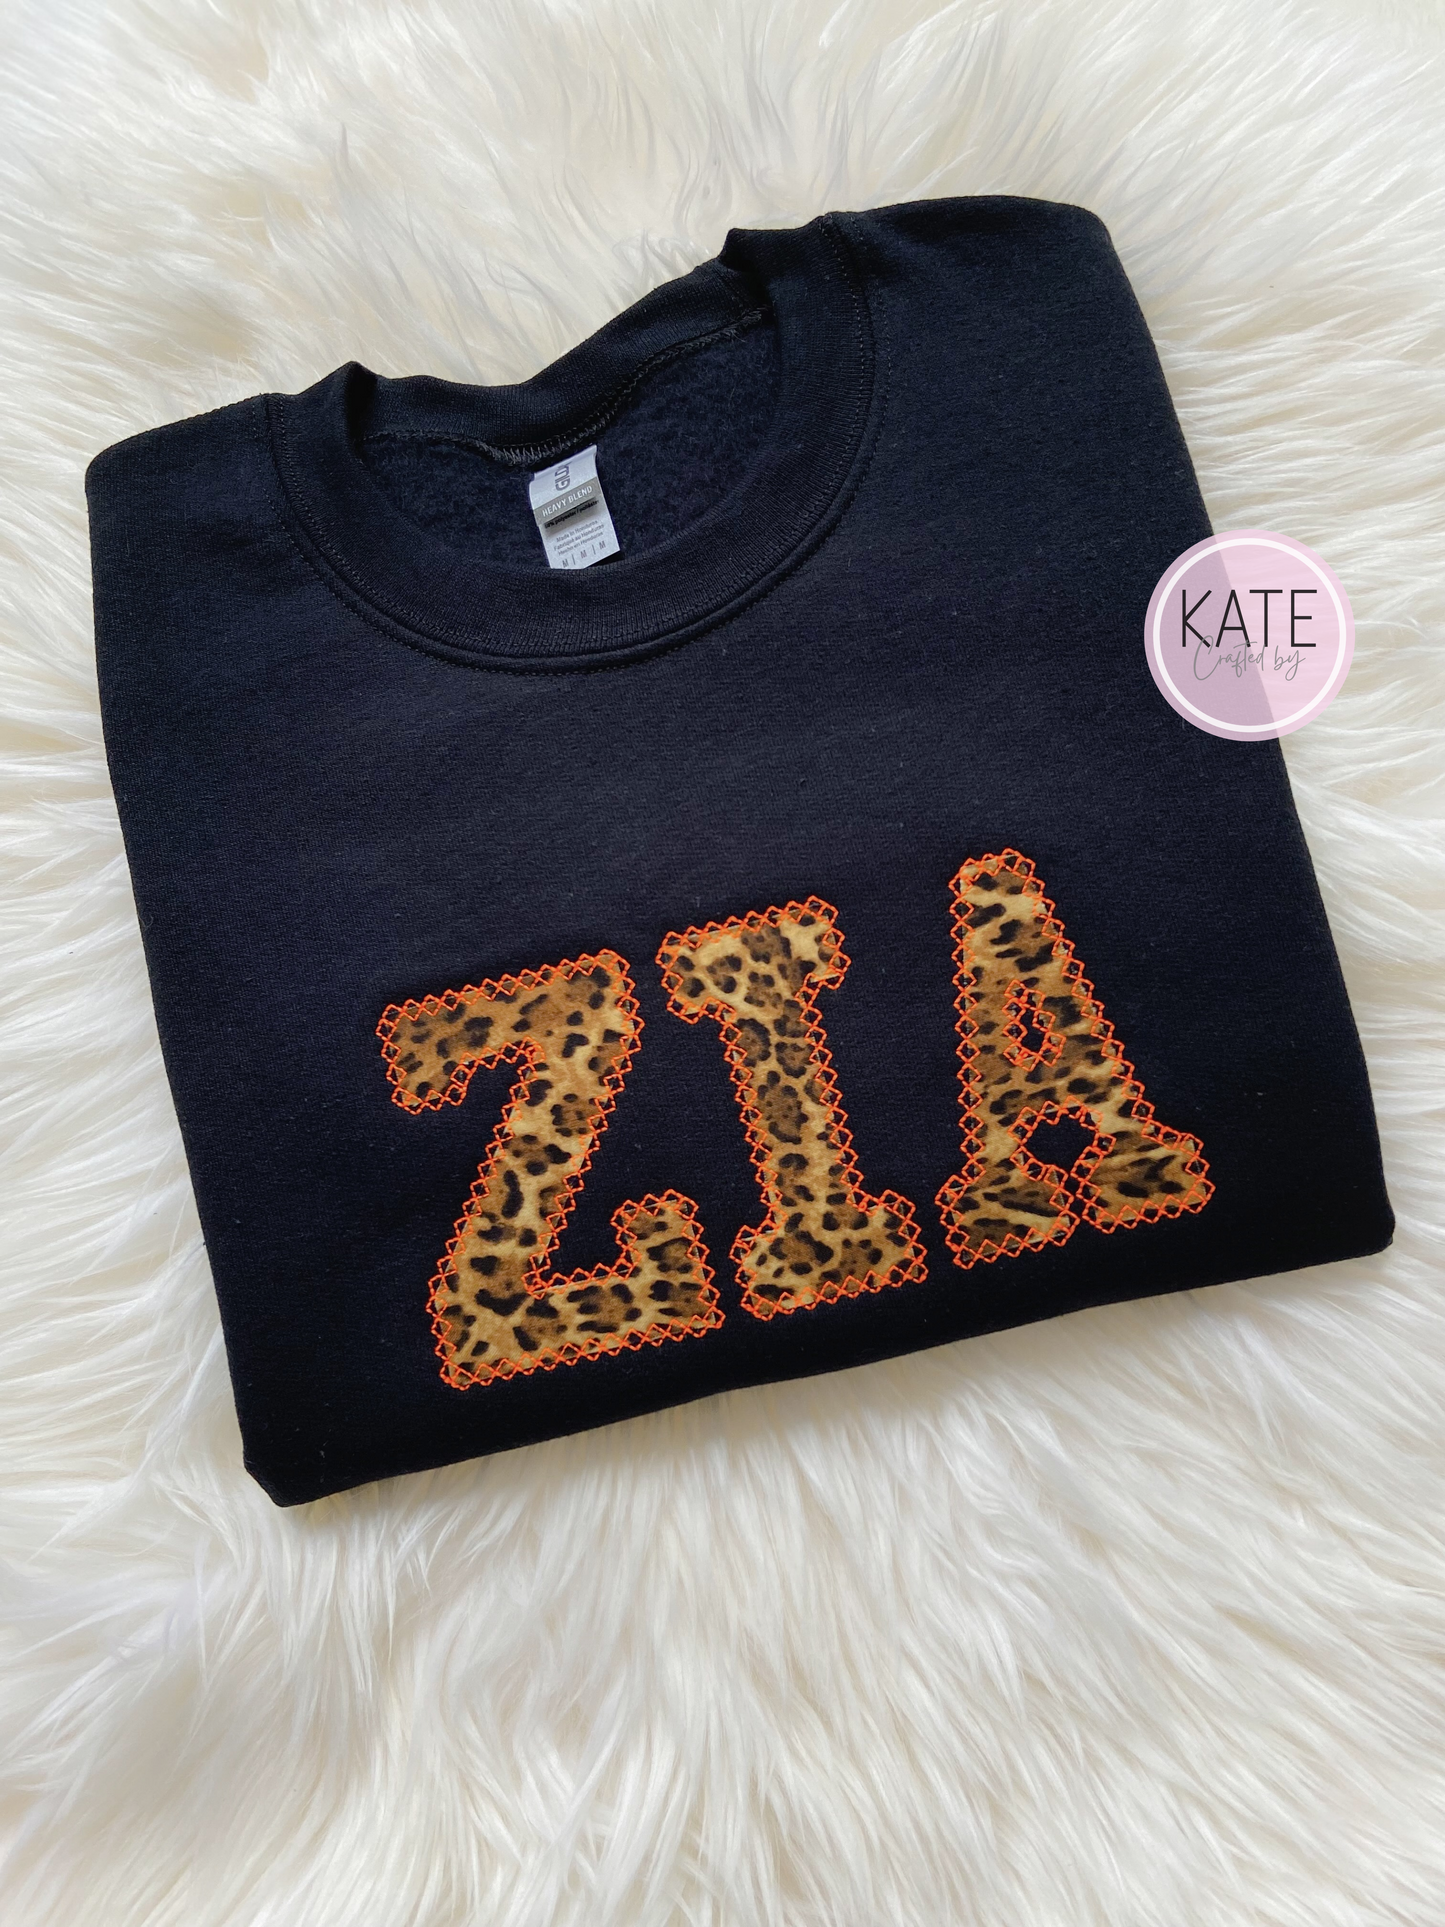 Cheetah Print Applique Embroidered Sweater